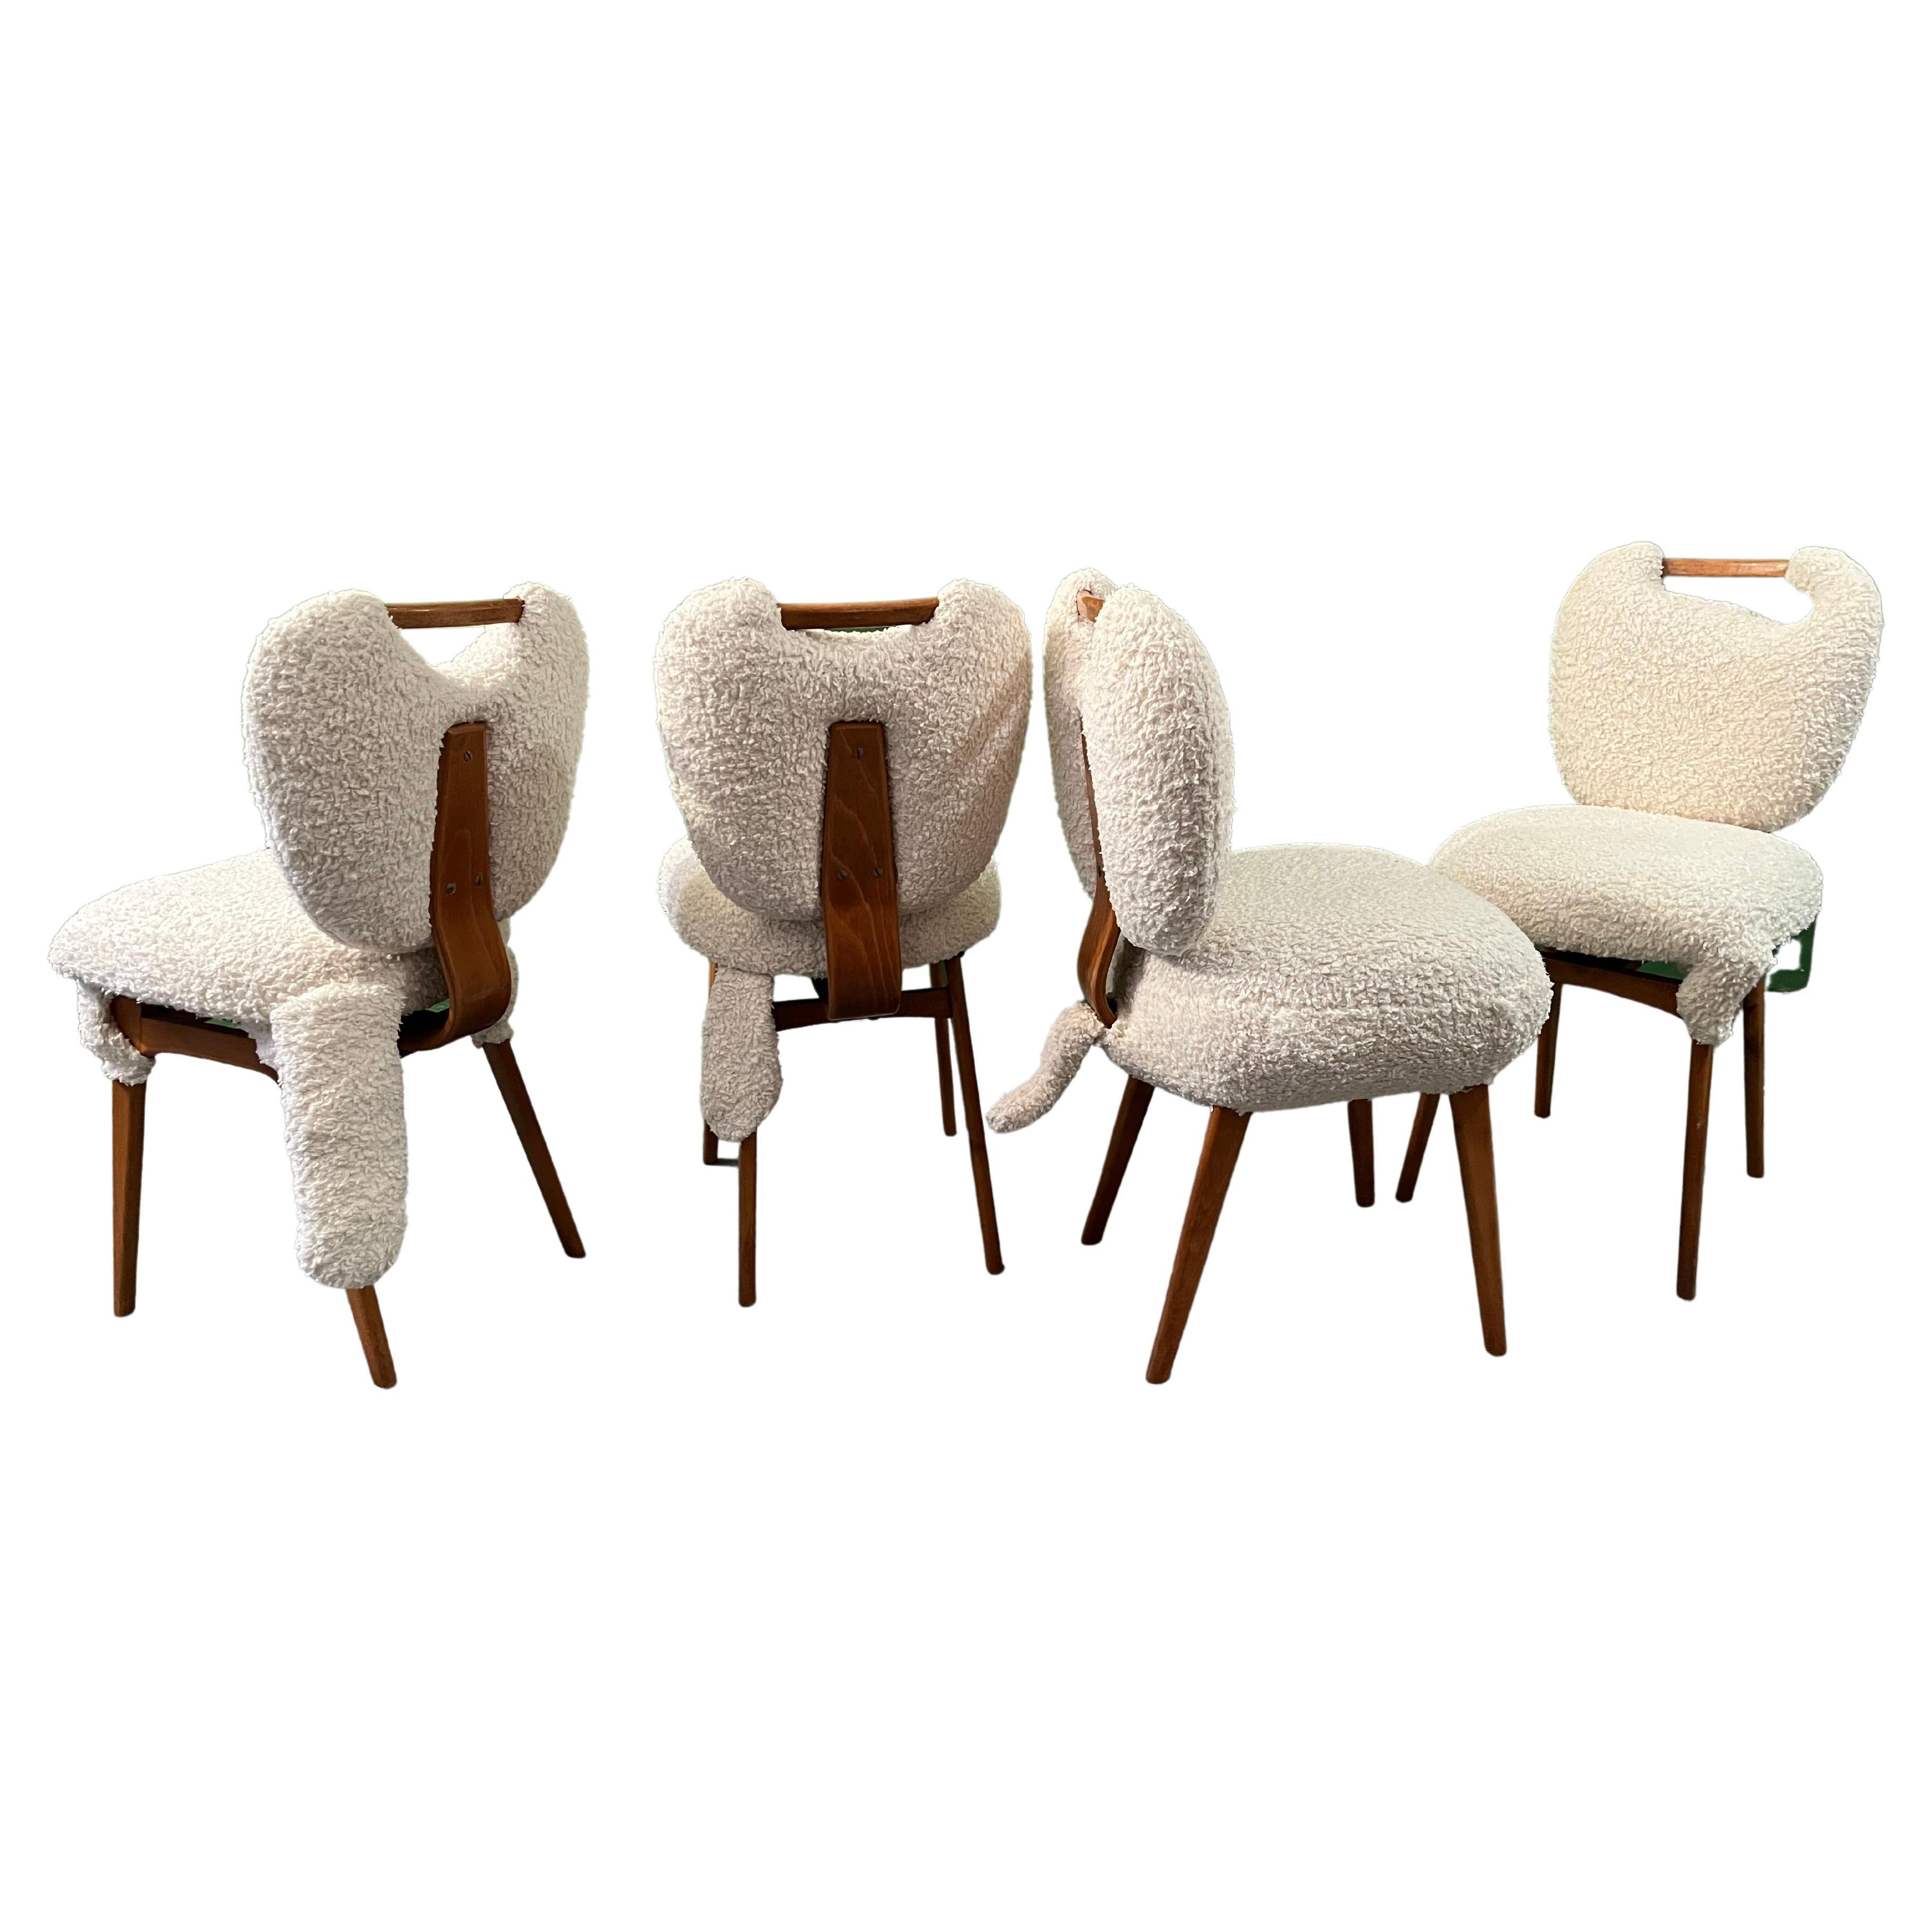 Teddy Chairs by Markus Friedrich Staab/ Contemporized For Sale